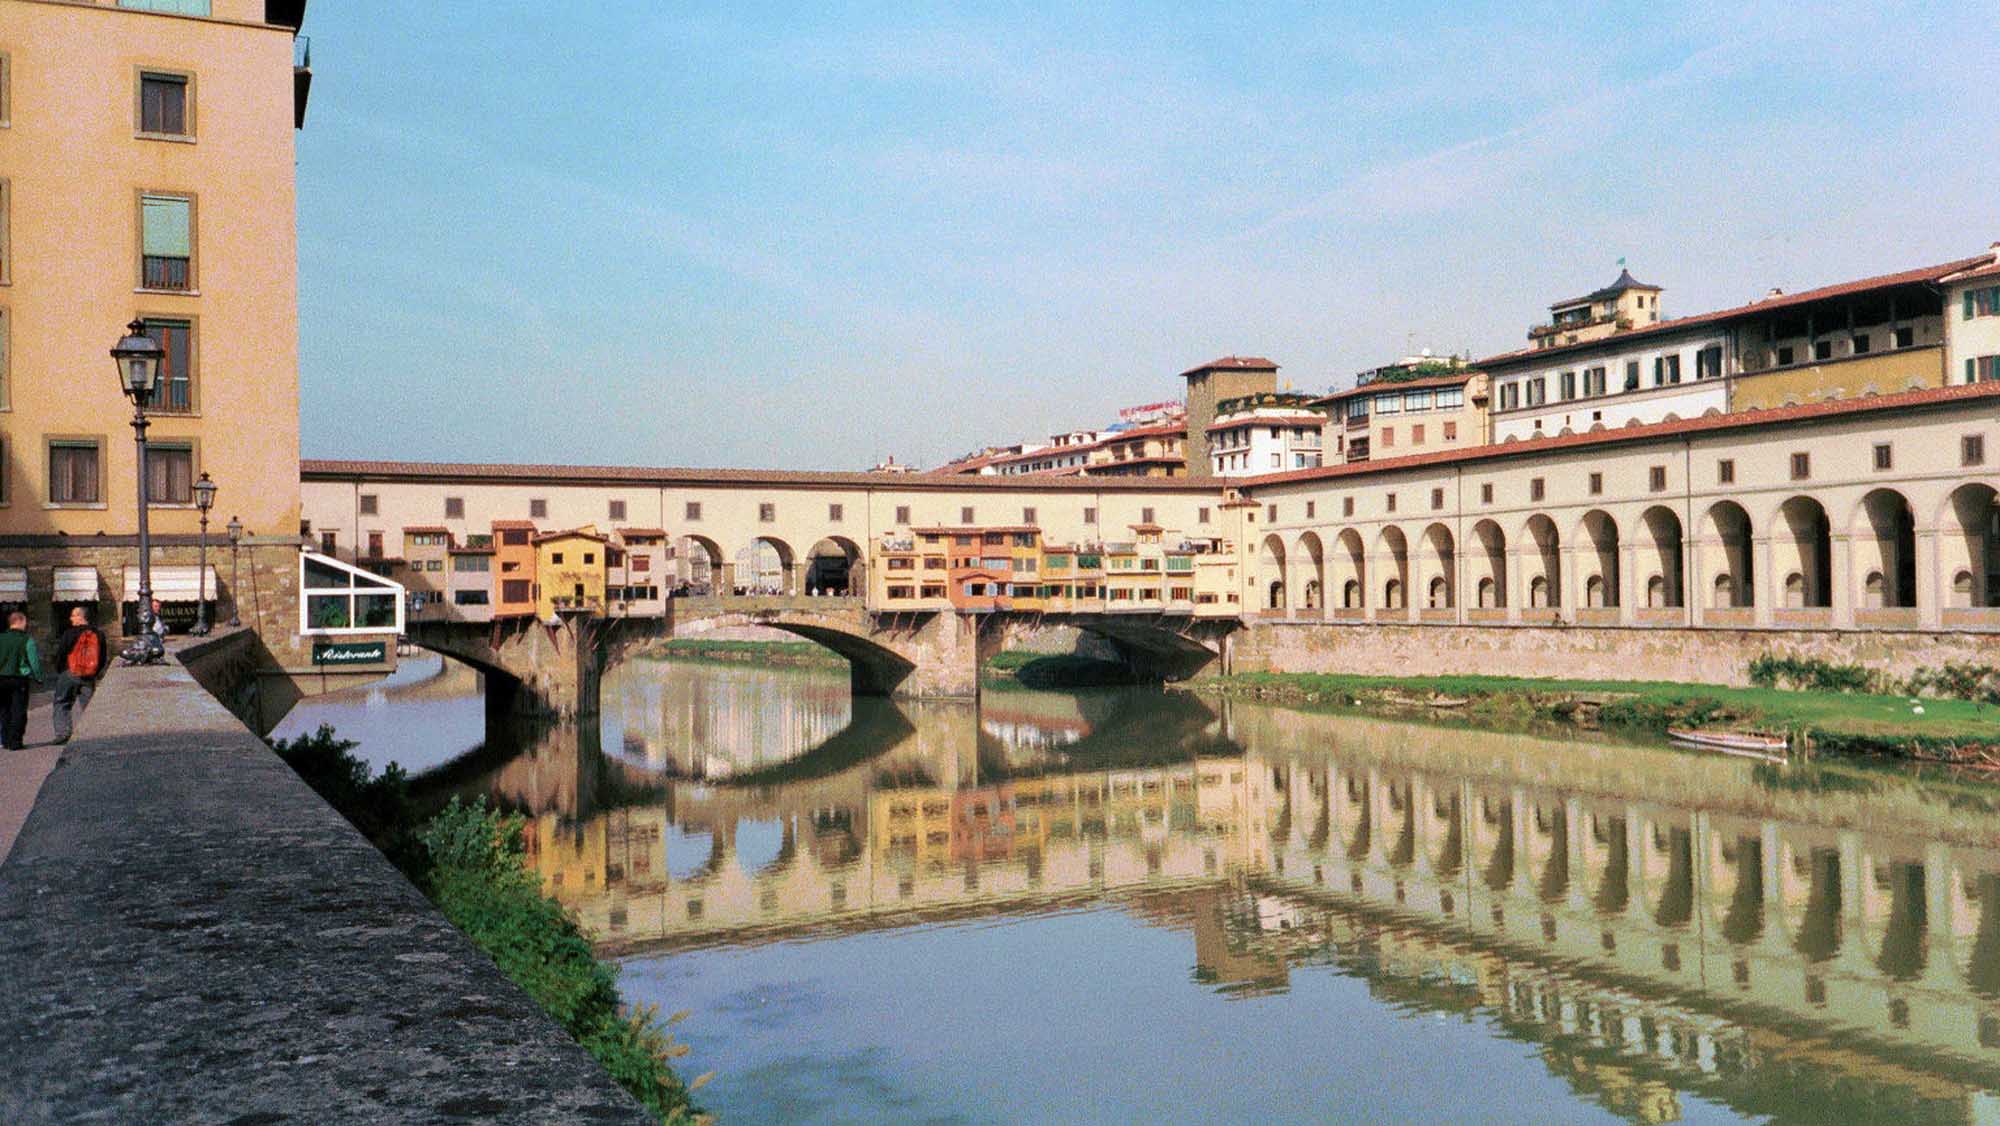 The Ponte Vecchio (Italian for Old Bridge) is a medieval bridge over the Arno River in Florence, Italy.